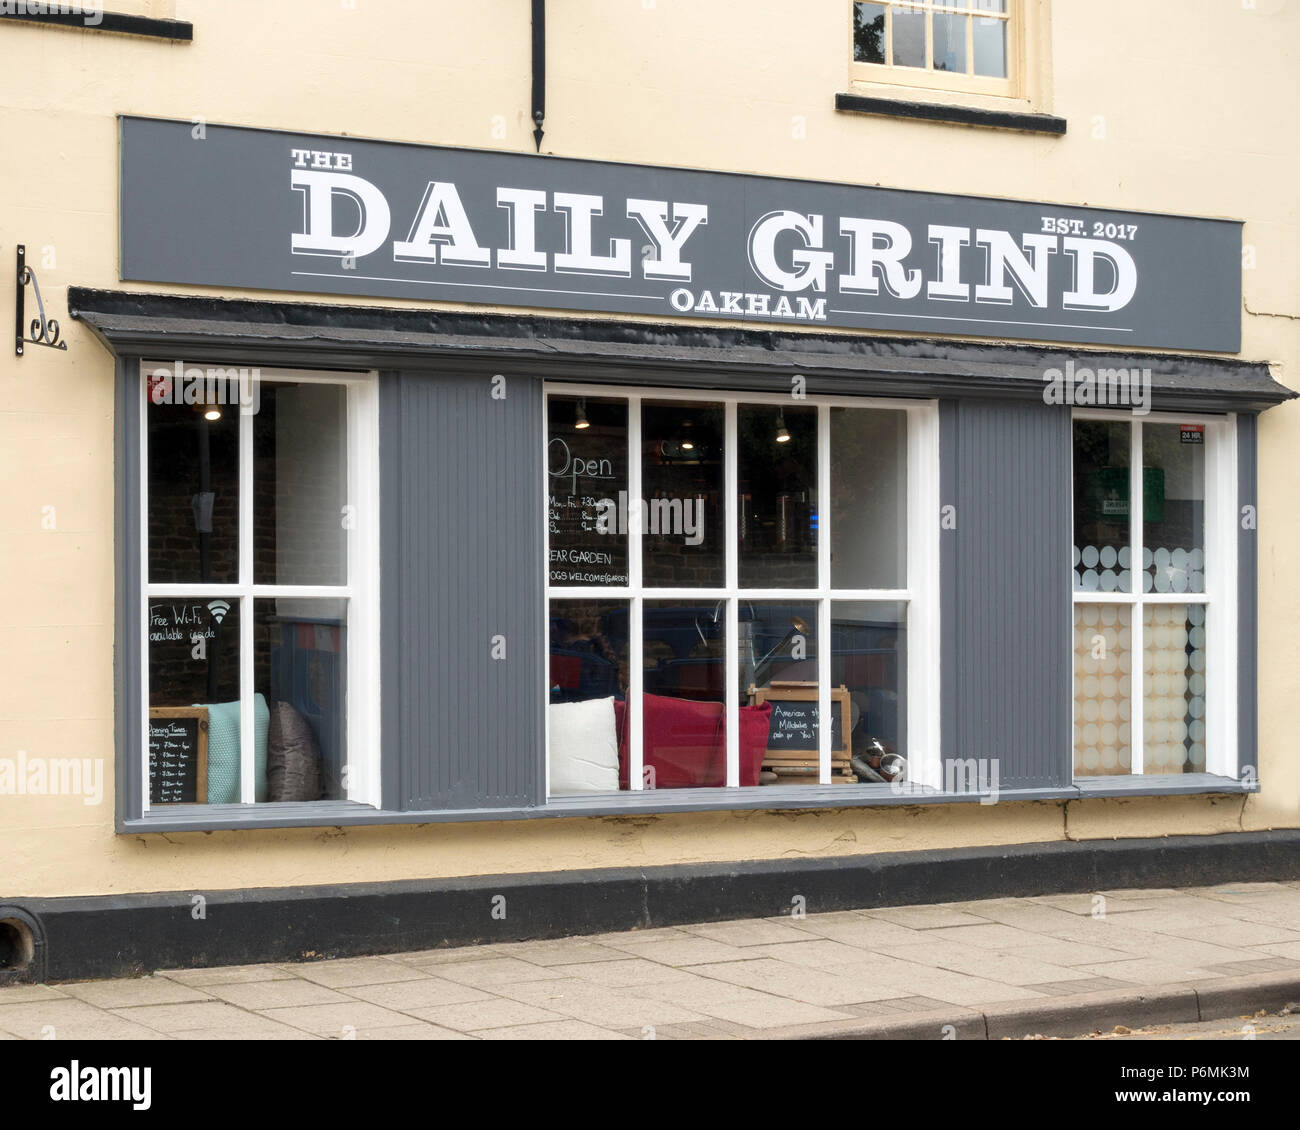 Exterior of the 'The Daily Grind' coffee shop cafe, Oakham, Rutland, England, UK Stock Photo